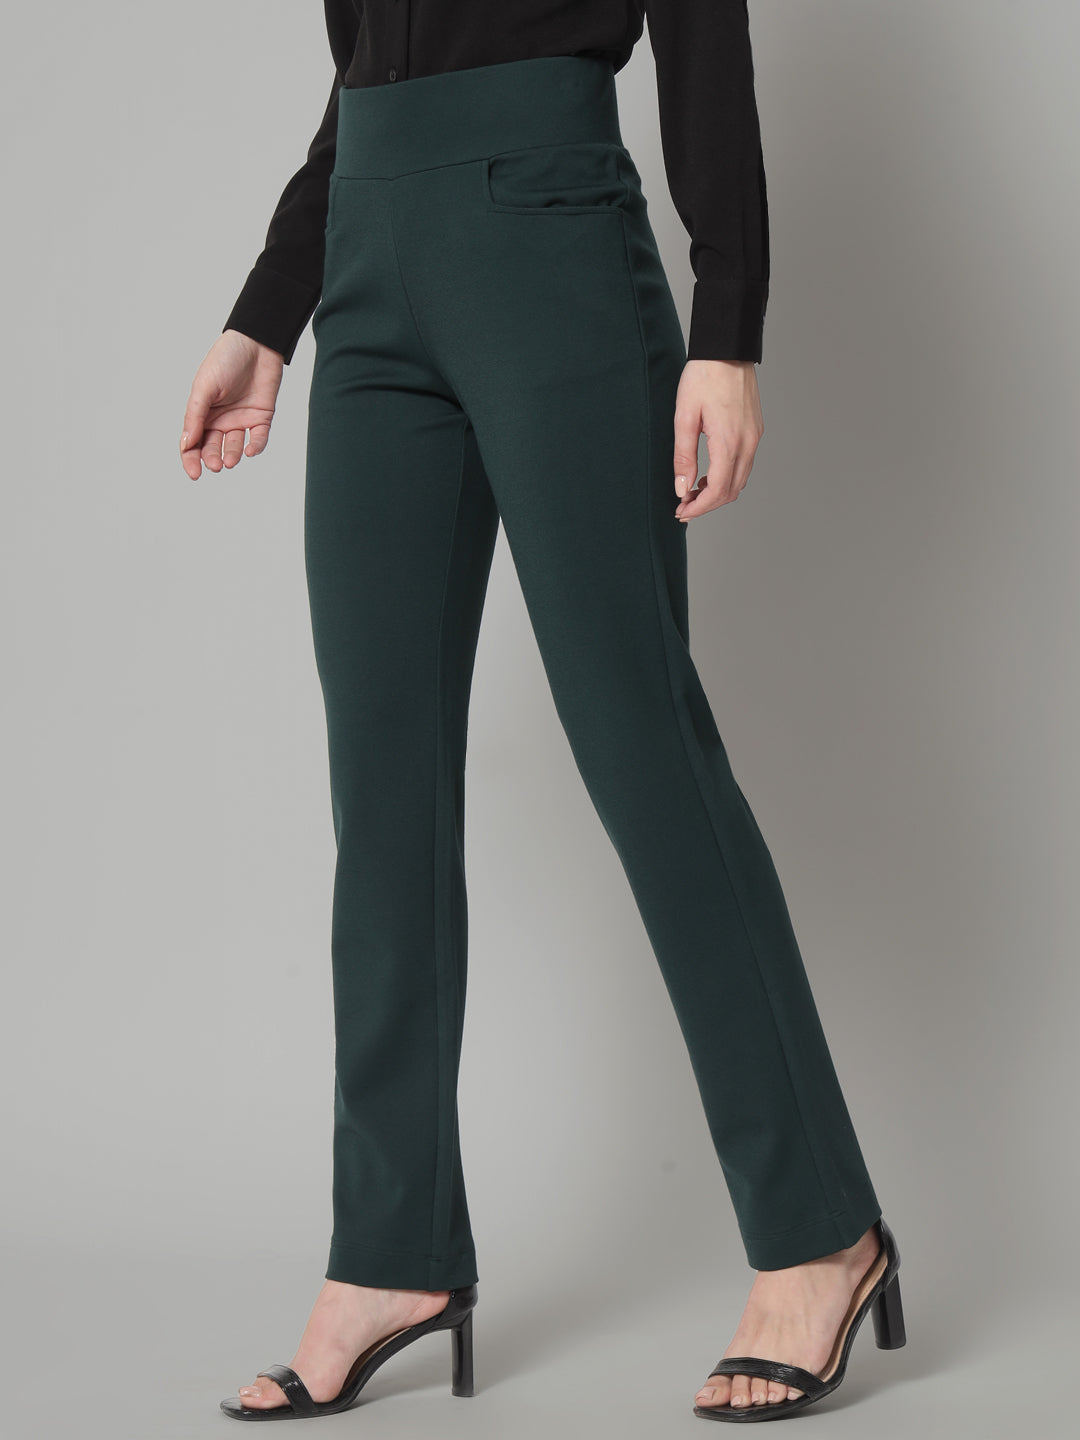 SOLID BOTTLE GREEN BELL BOTTOM PANTS FOR WOMEN, Waist Size: FREE SIZE at Rs  249 in Surat